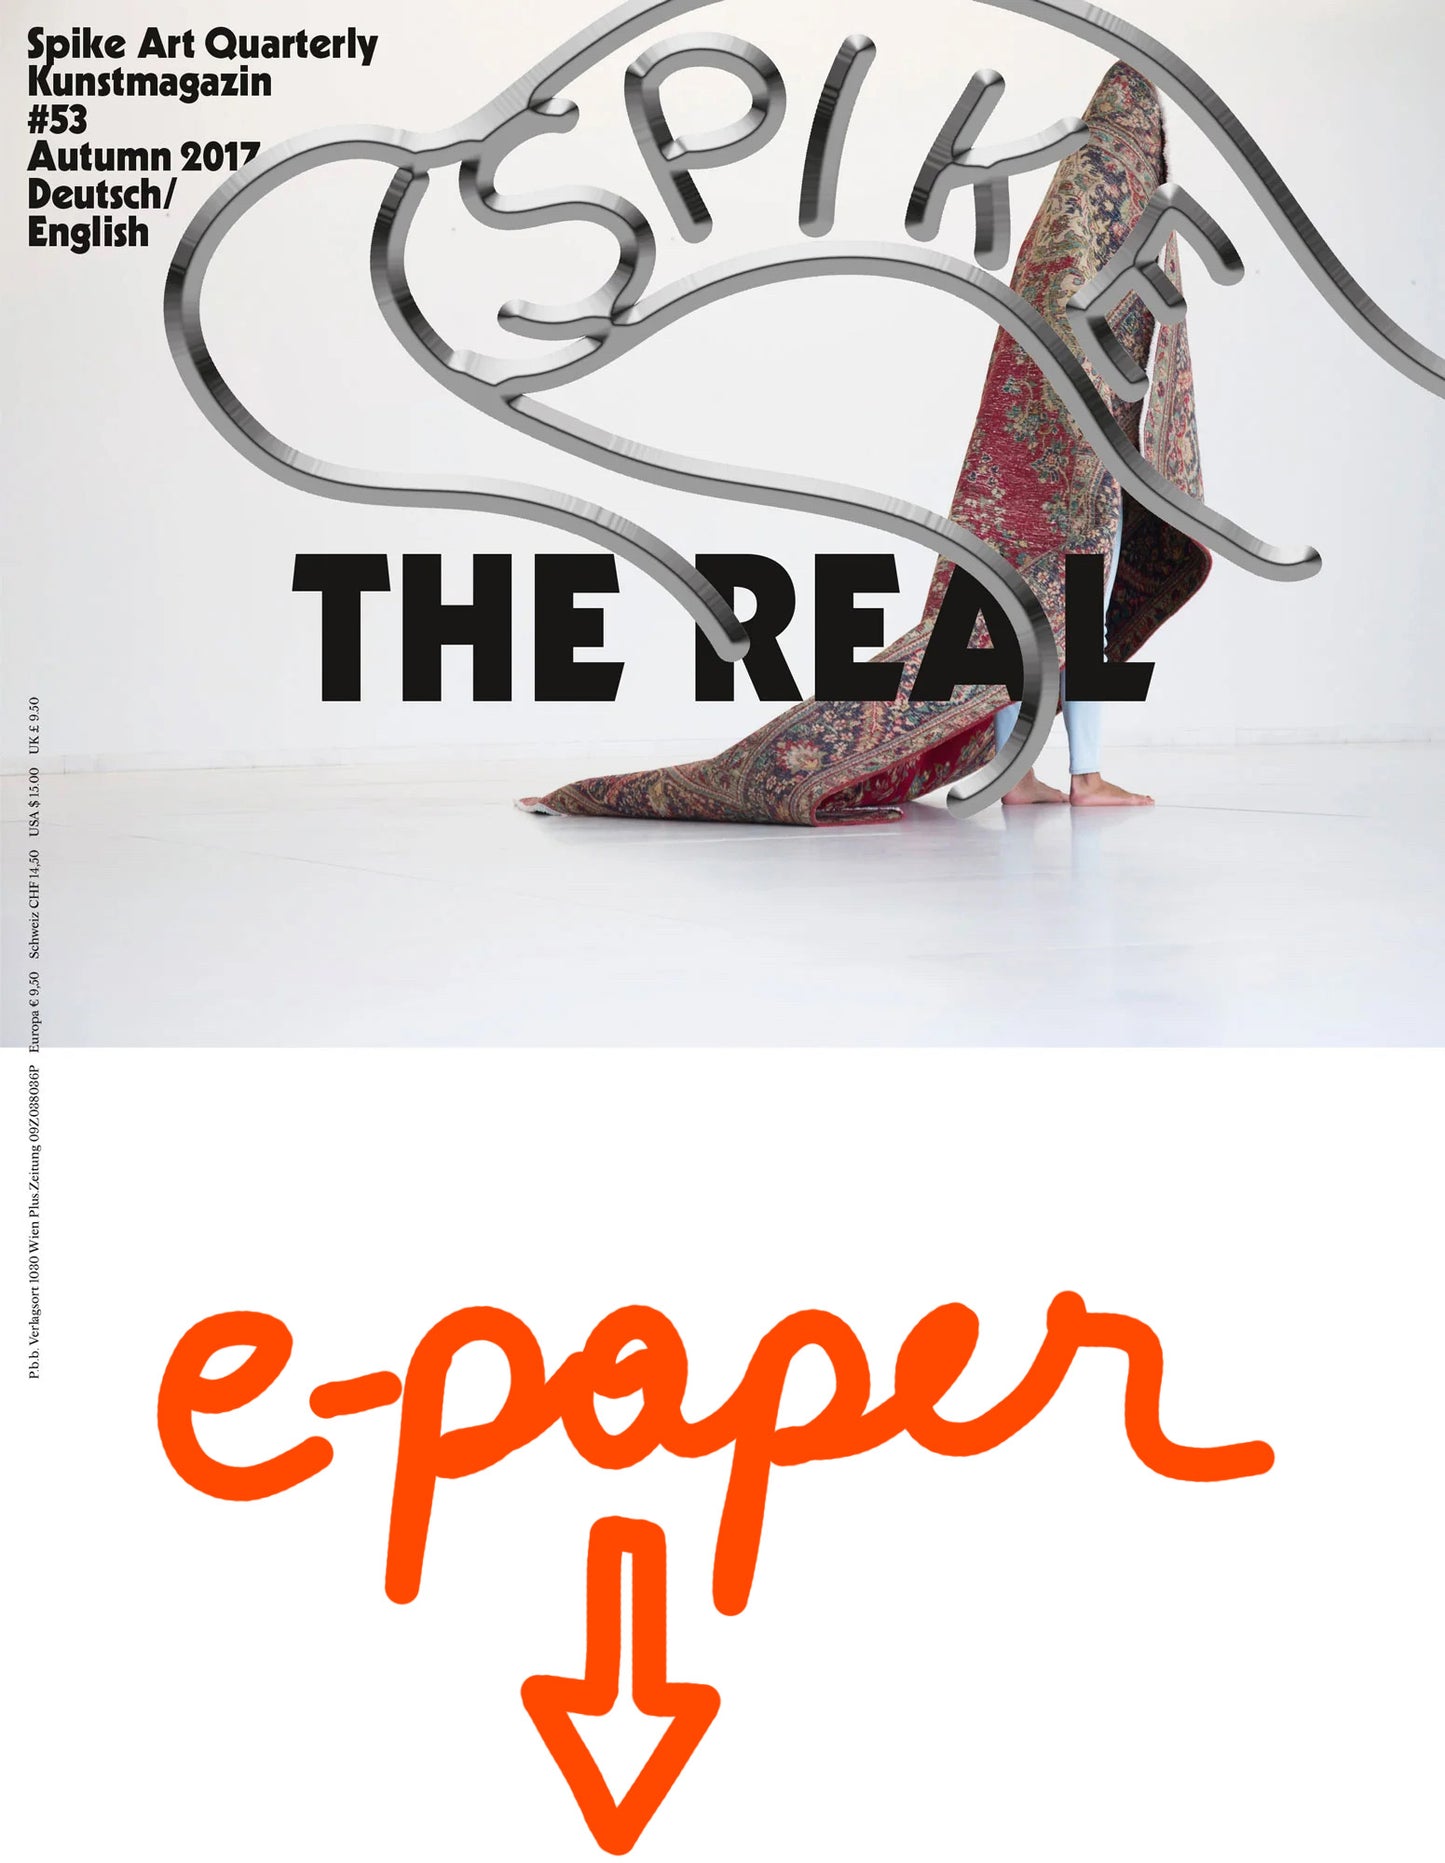 Spike ePaper (Issue 53): The Real